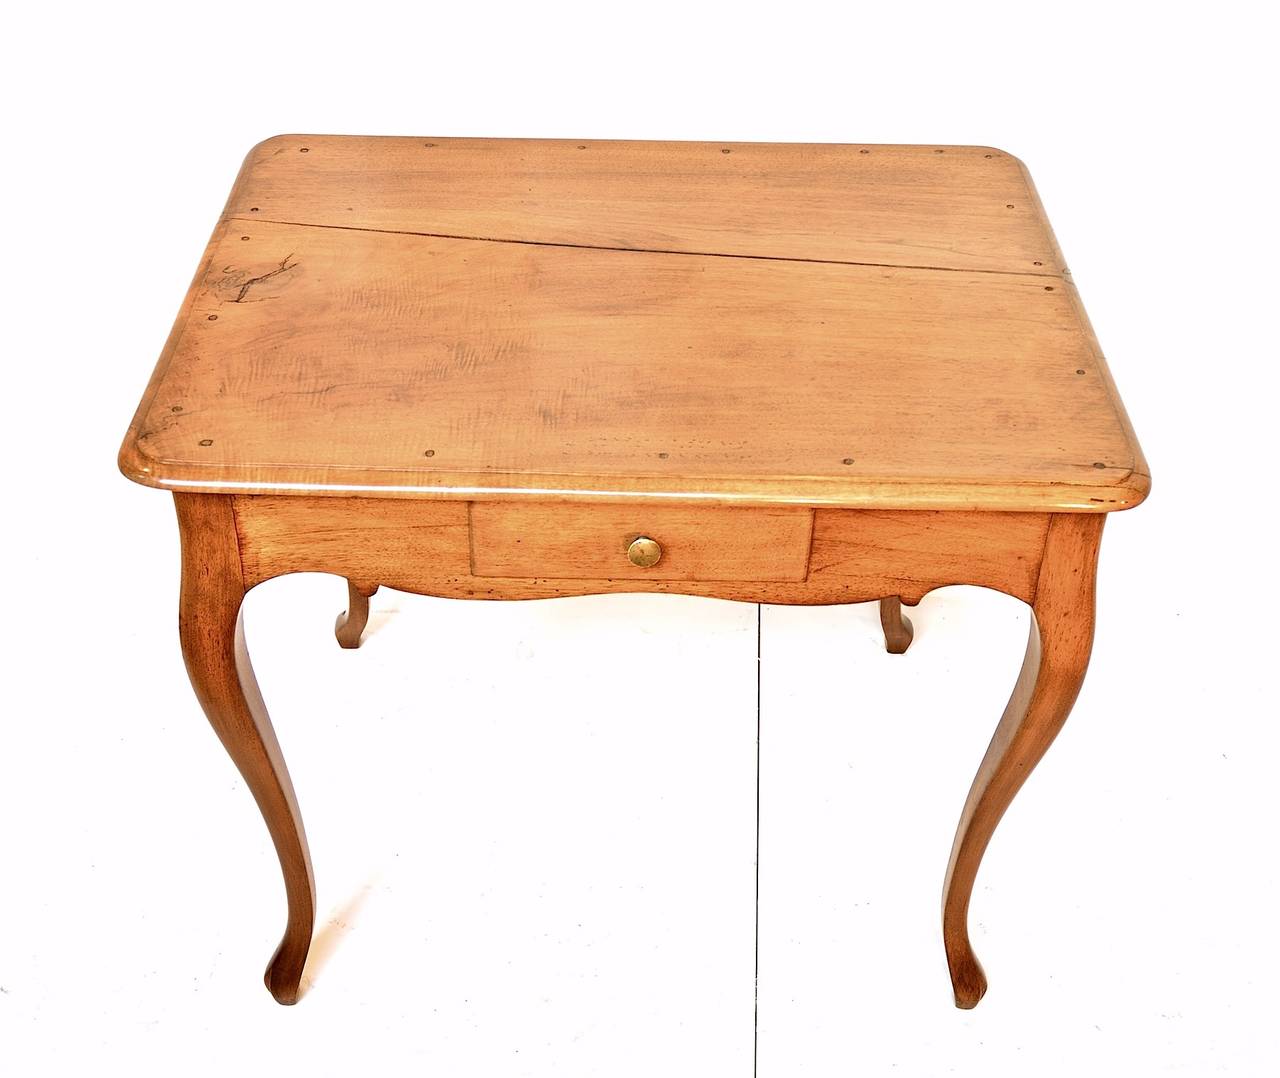 19th century Provincial occasional table of walnut having a single short drawer, pegged mortise and tenion construction and fabulous curvy legs terminating in simple hoof feet. The rustic and gently sun-bleached table is finished all the way around